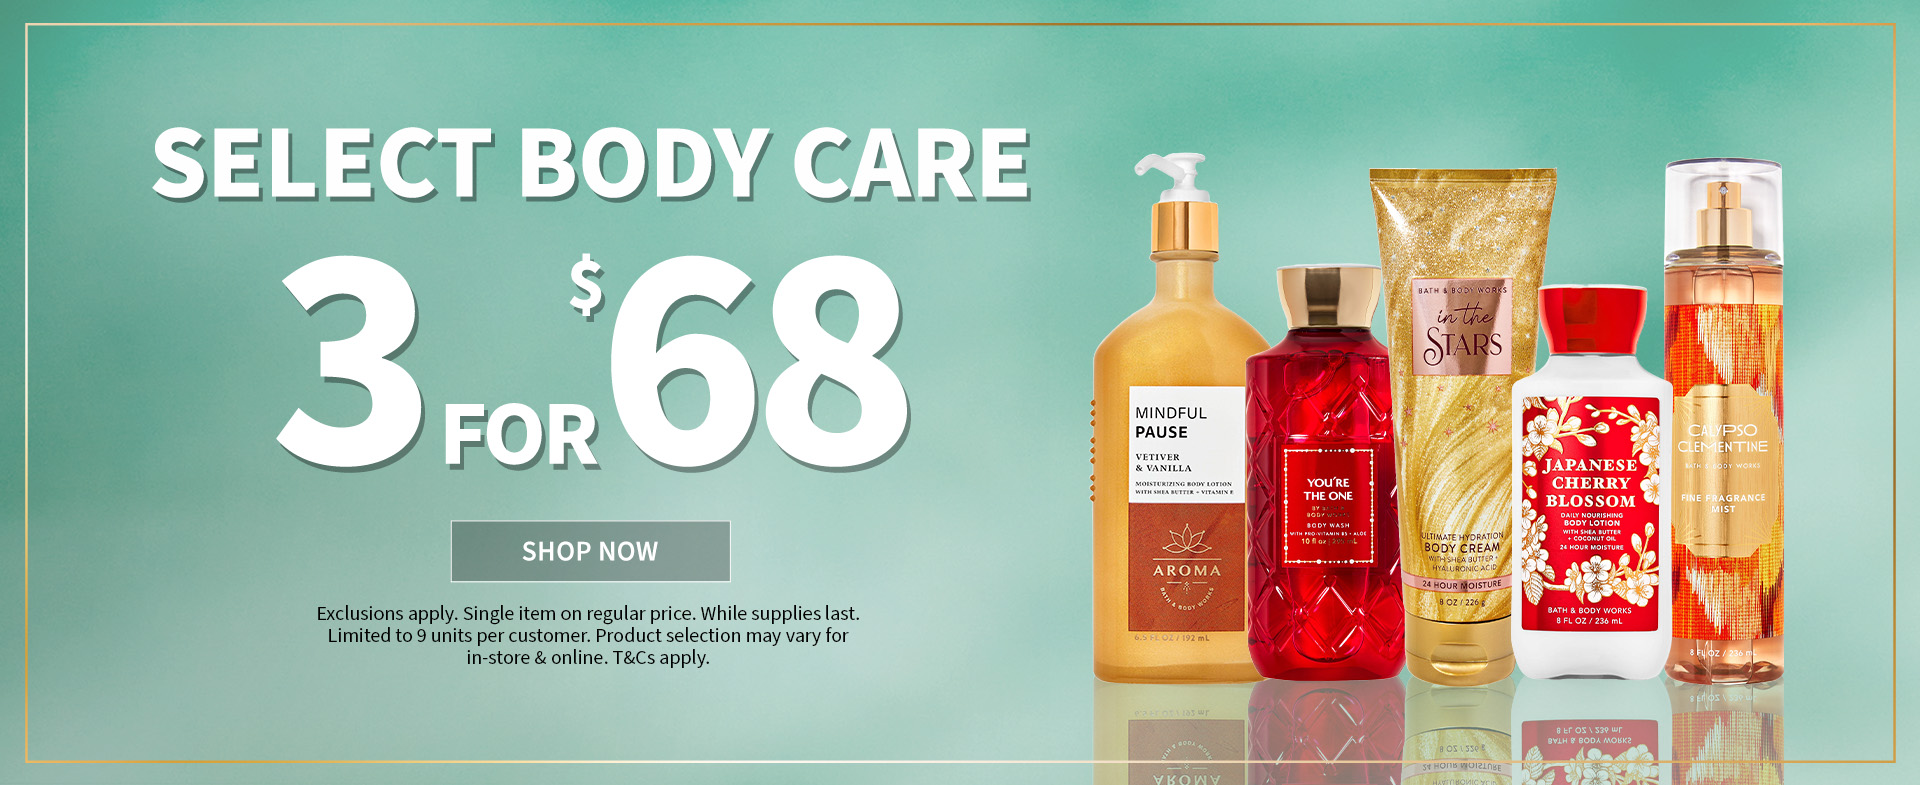 MIX & MATCH SELECT BODY CARE BUY 2, GET 1 FREE